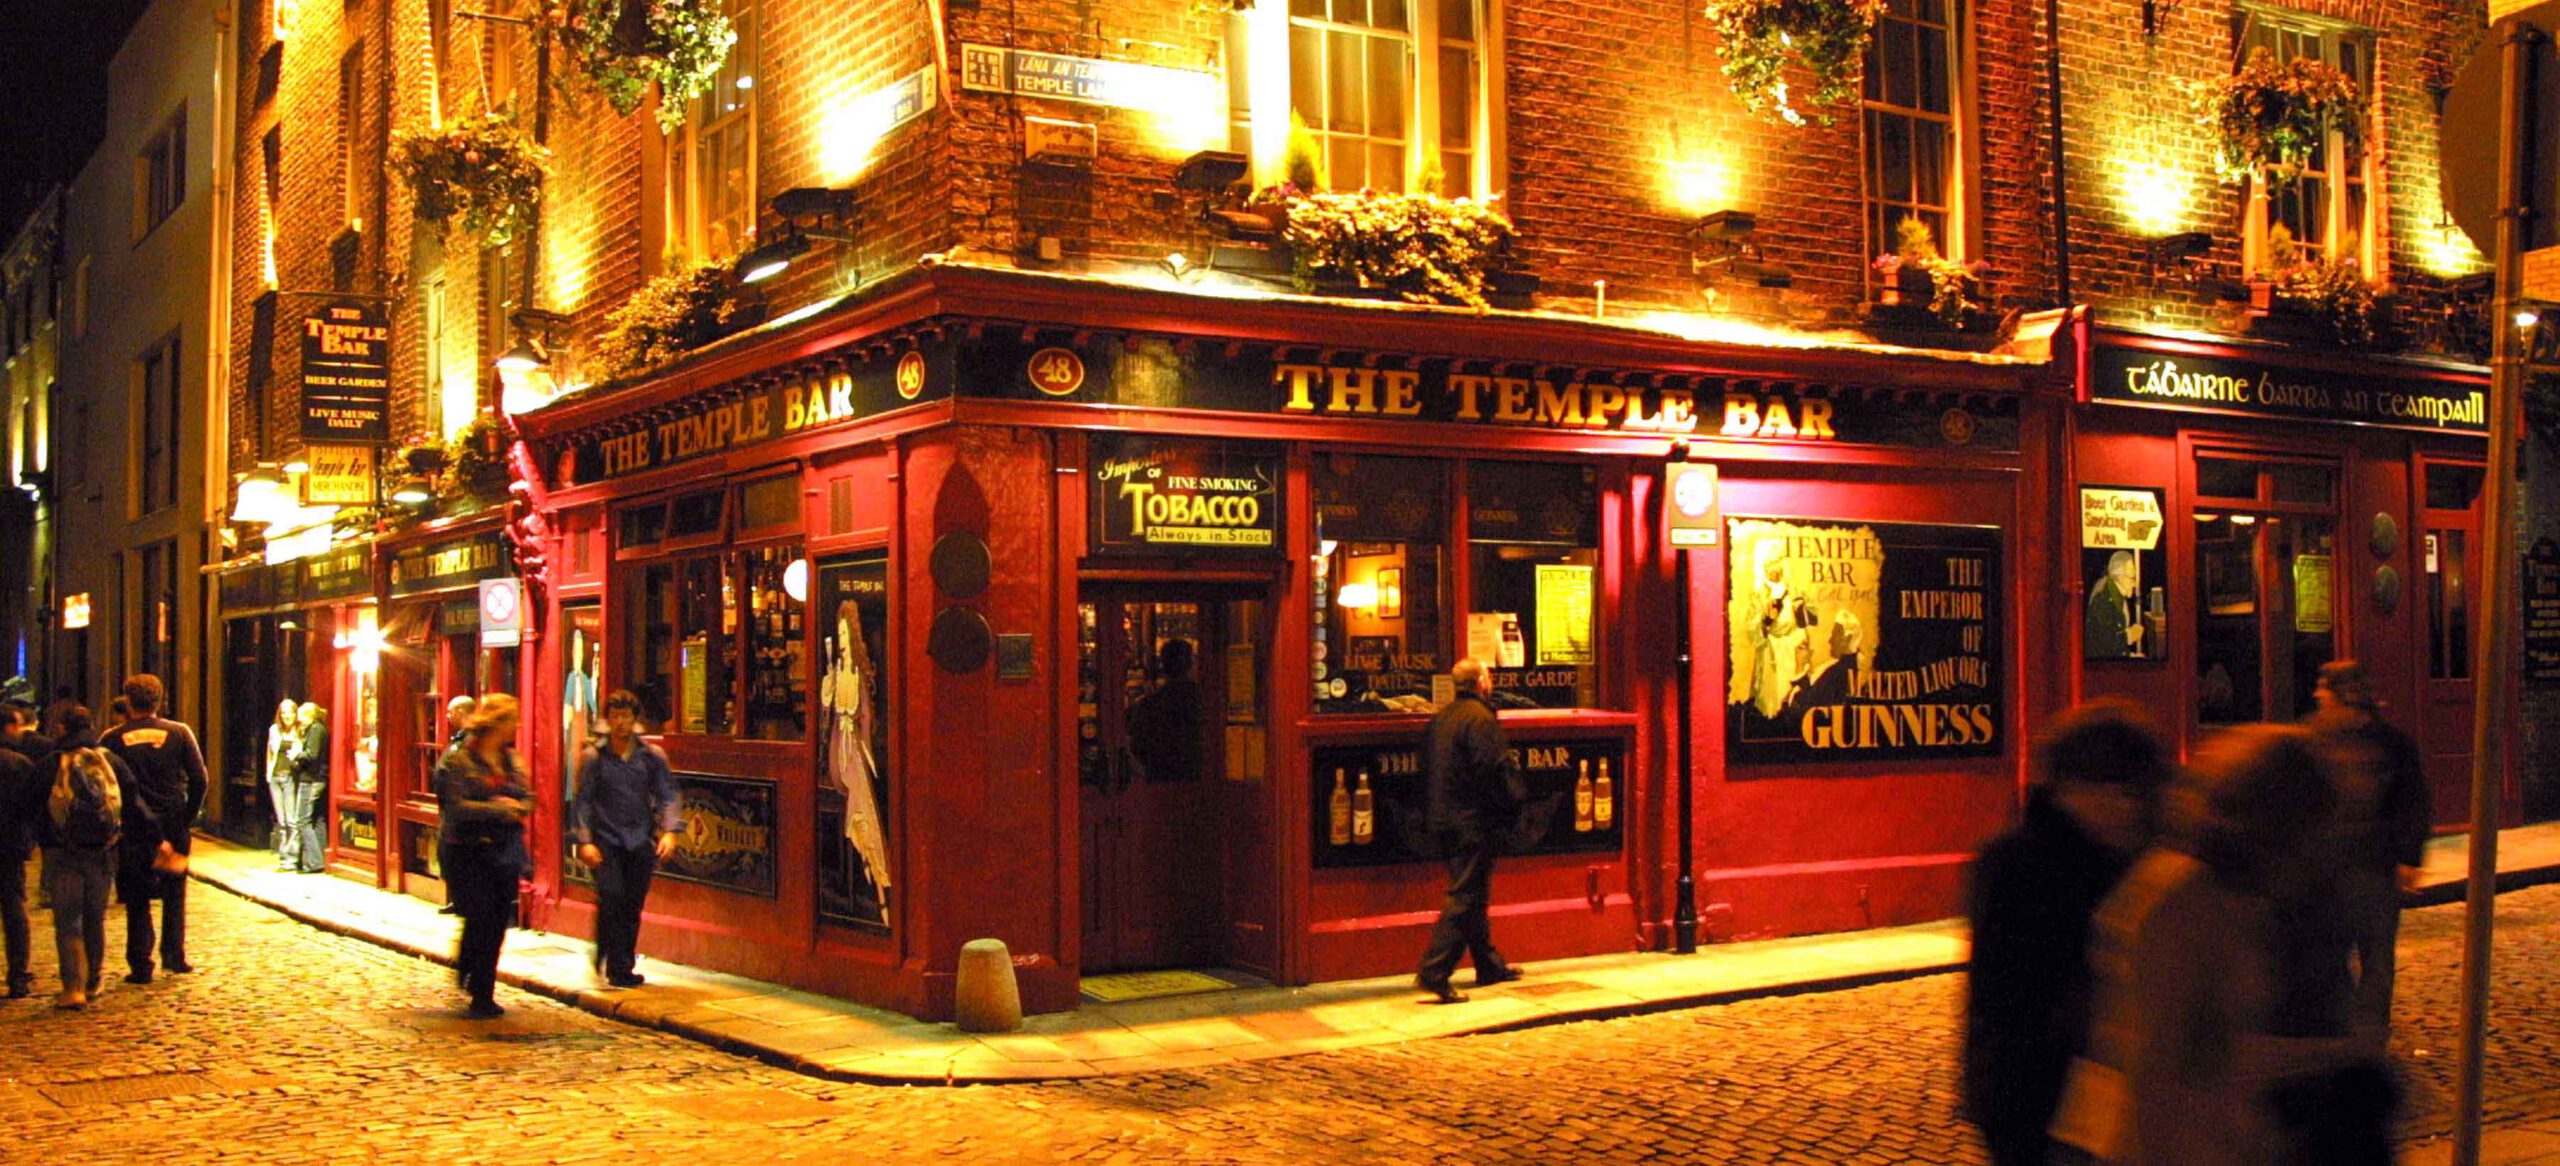 The Temple Bar Pub, Temple Bar, landscape with some people outside